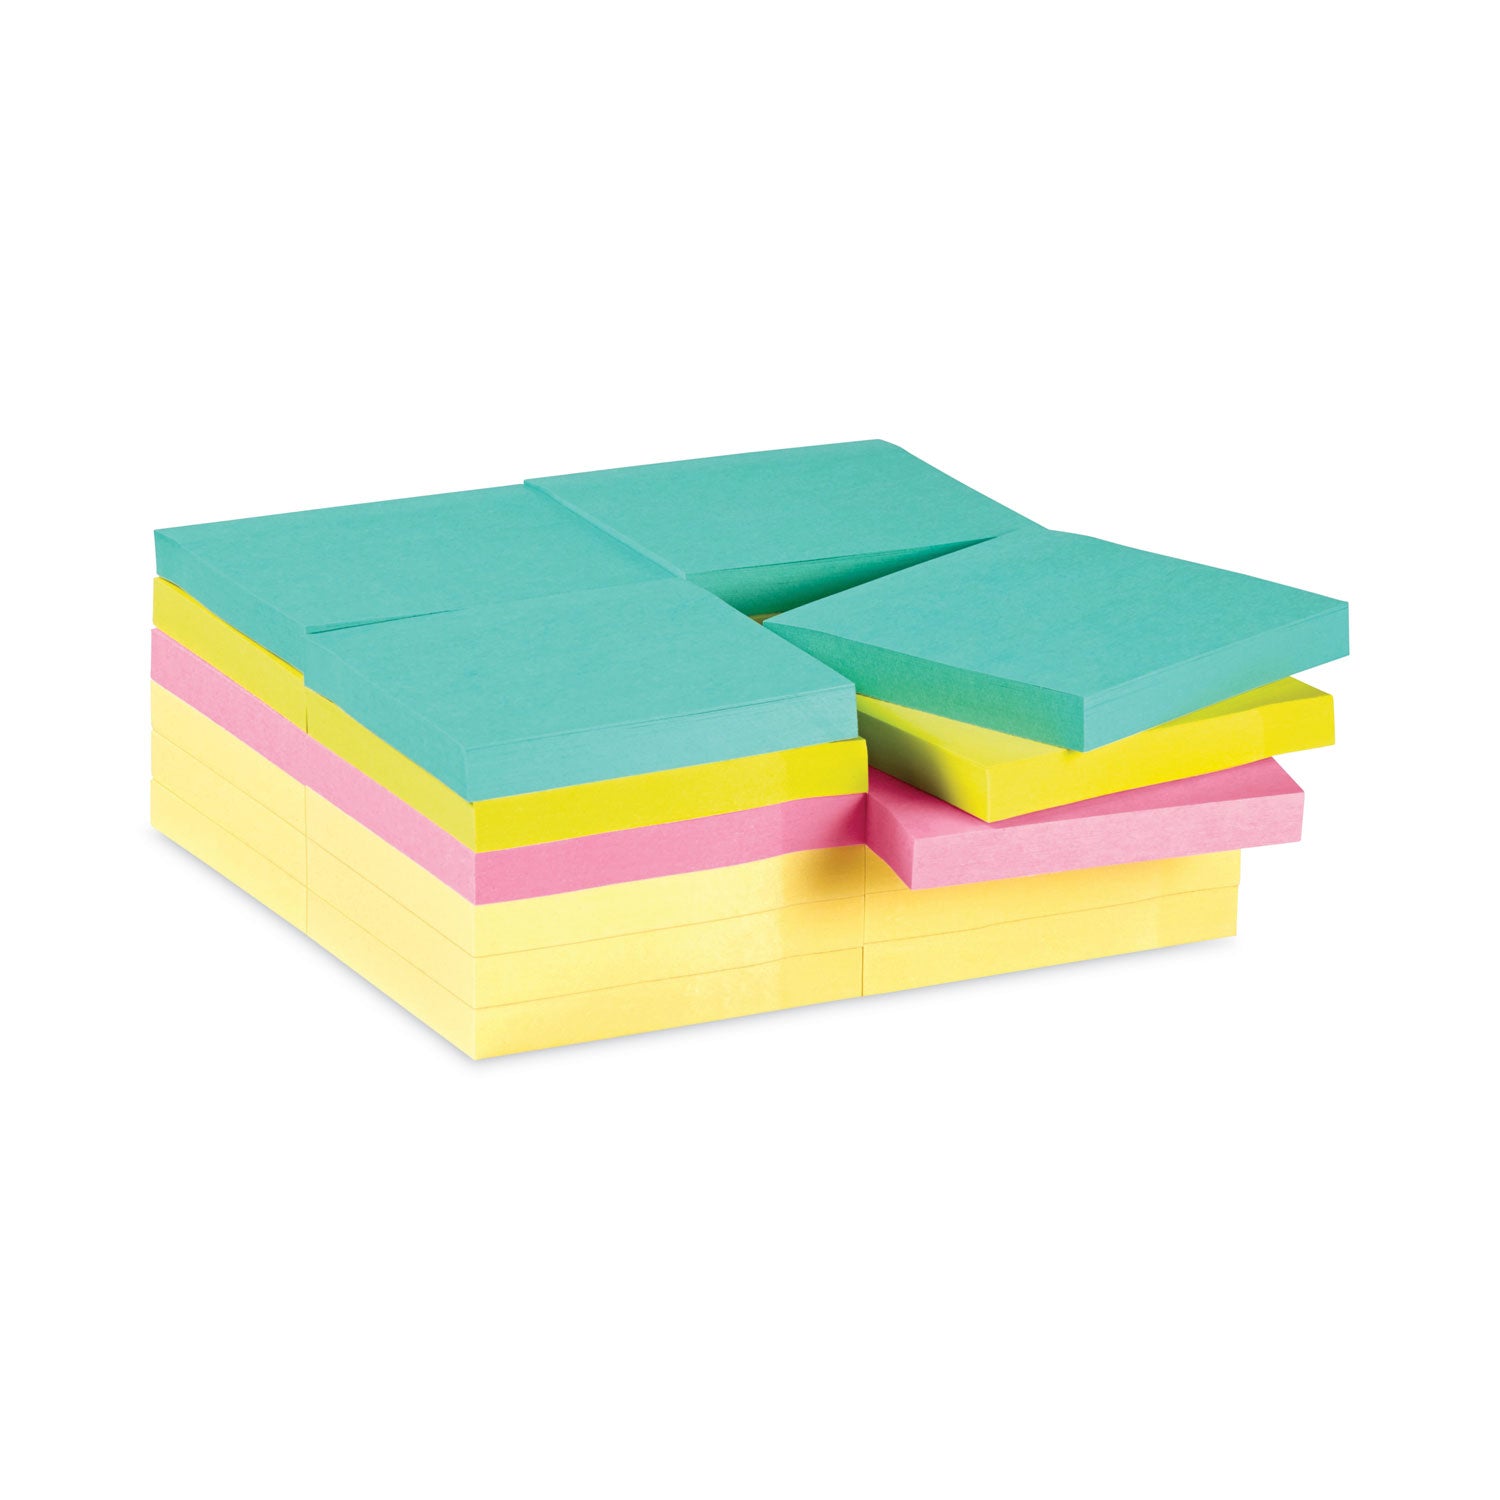 self-stick-notes-office-pack-3-x-3-supernova-neons-collection-colors-90-sheets-pad-24-pads-pack_mmm65424sscym - 8